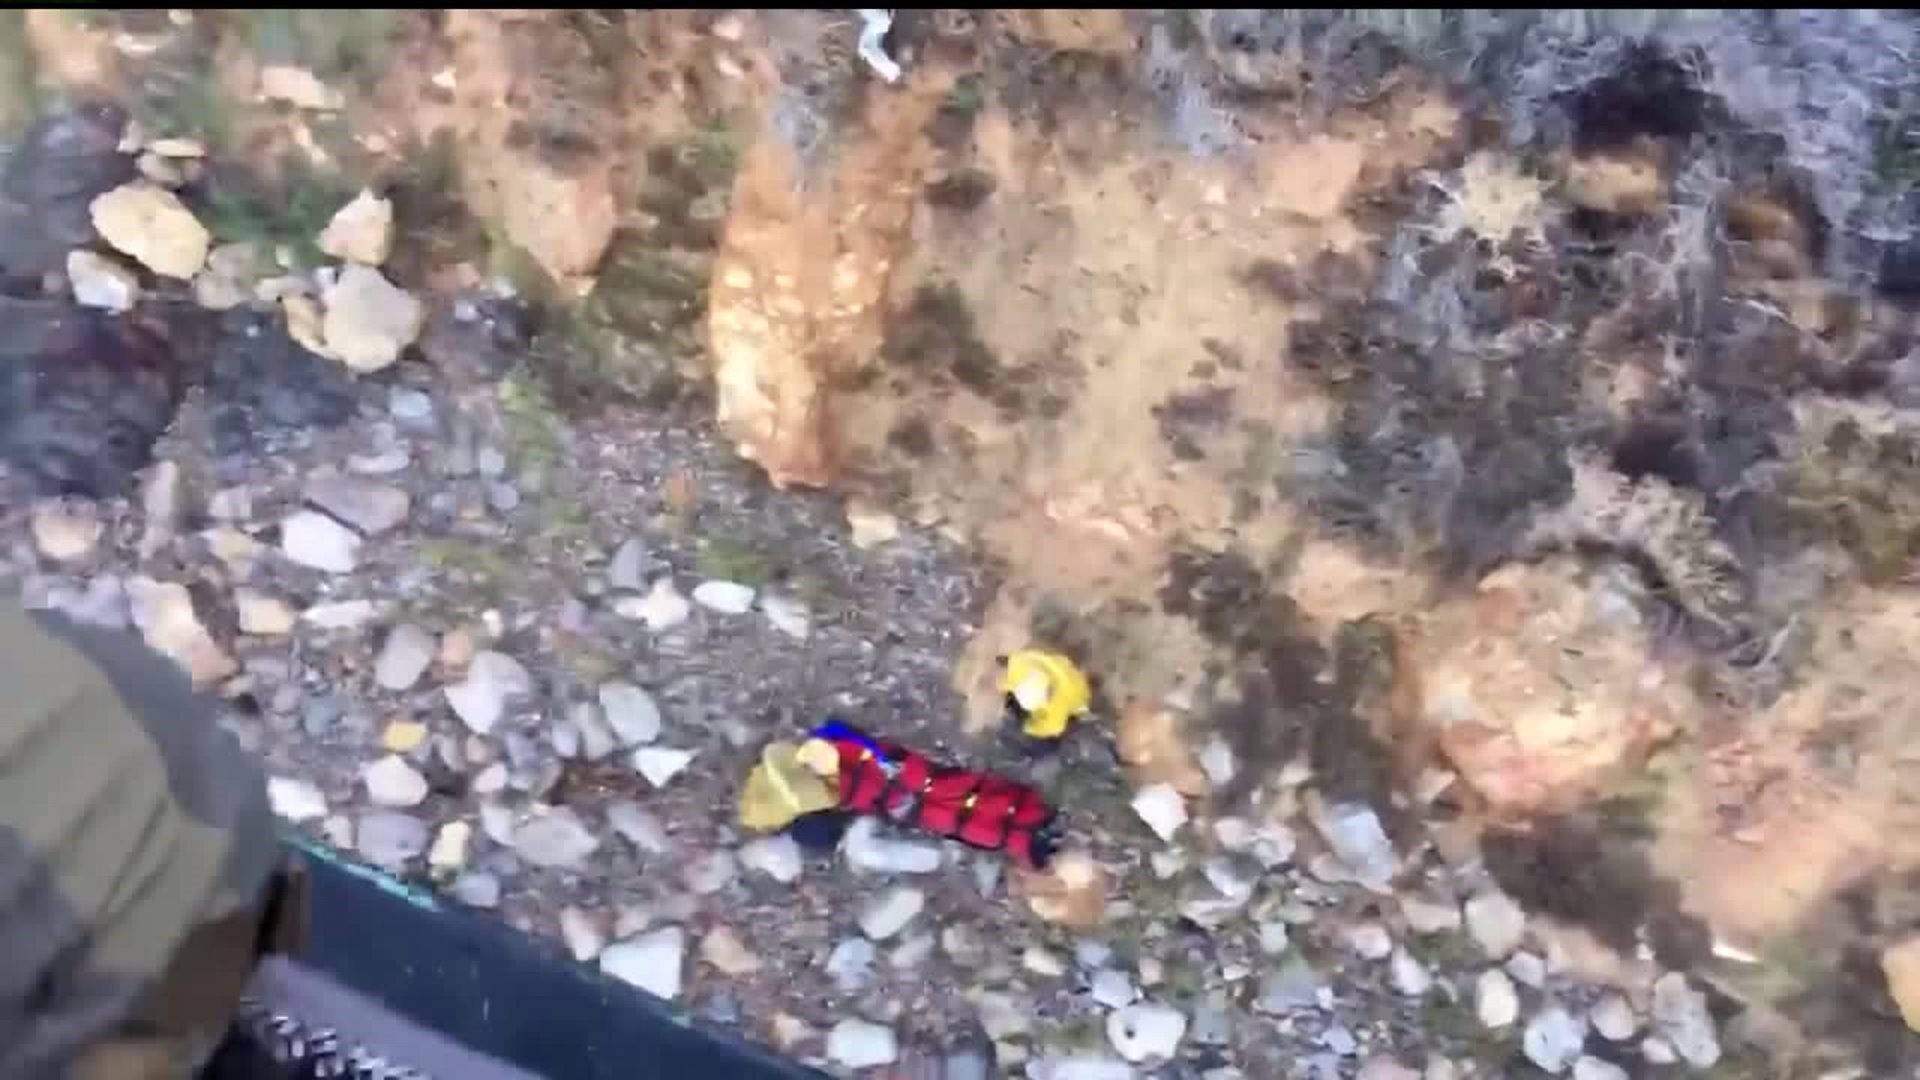 A woman fell off a 200-foot cliff in Southern California. Her cries for help may have saved her